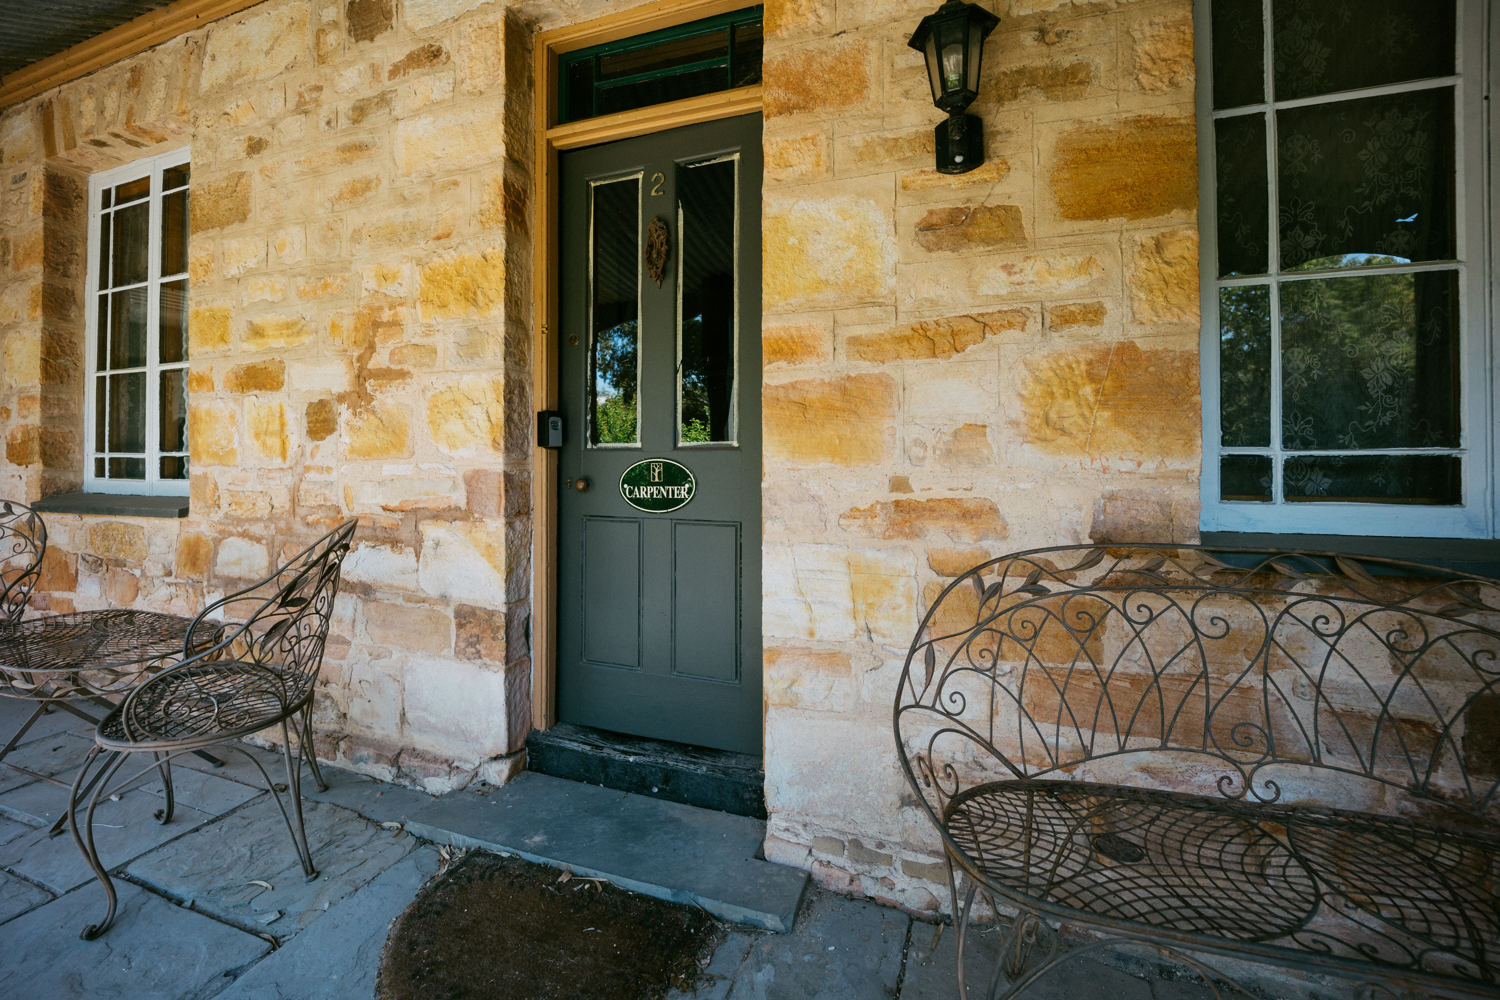 Mintaro Hideaway Clare Valley Holiday Accommodation - Enjoy a morning coffee on the verandah